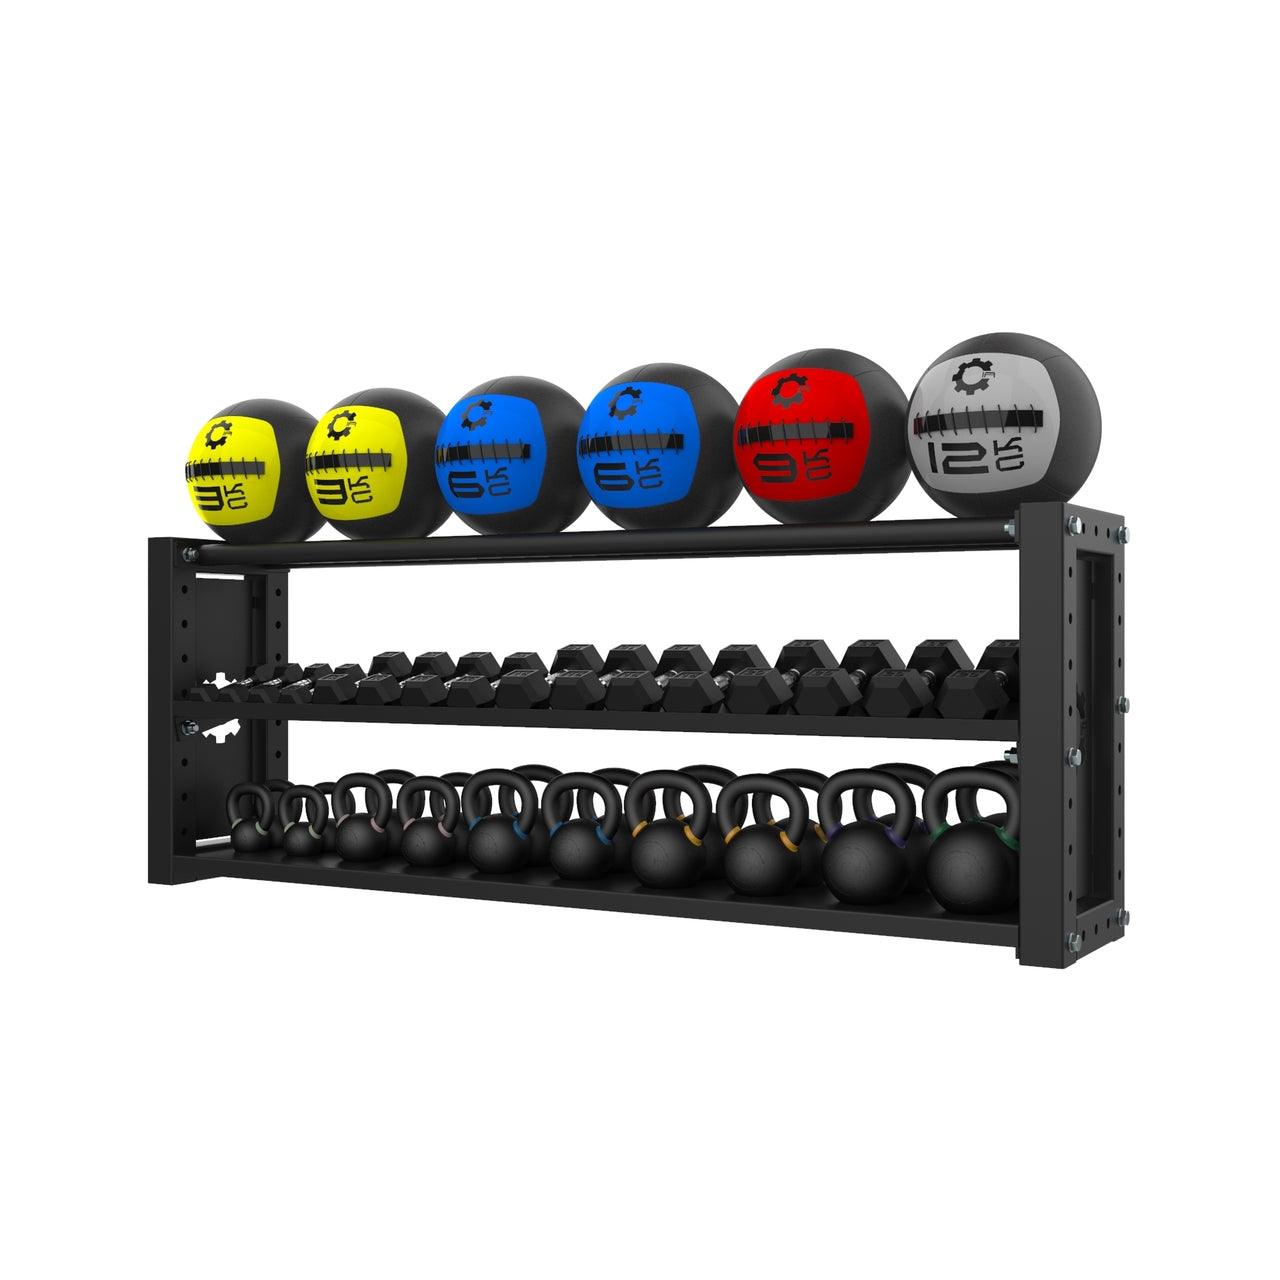 All in One Fitness Equipment Storage | Industrial Athletic